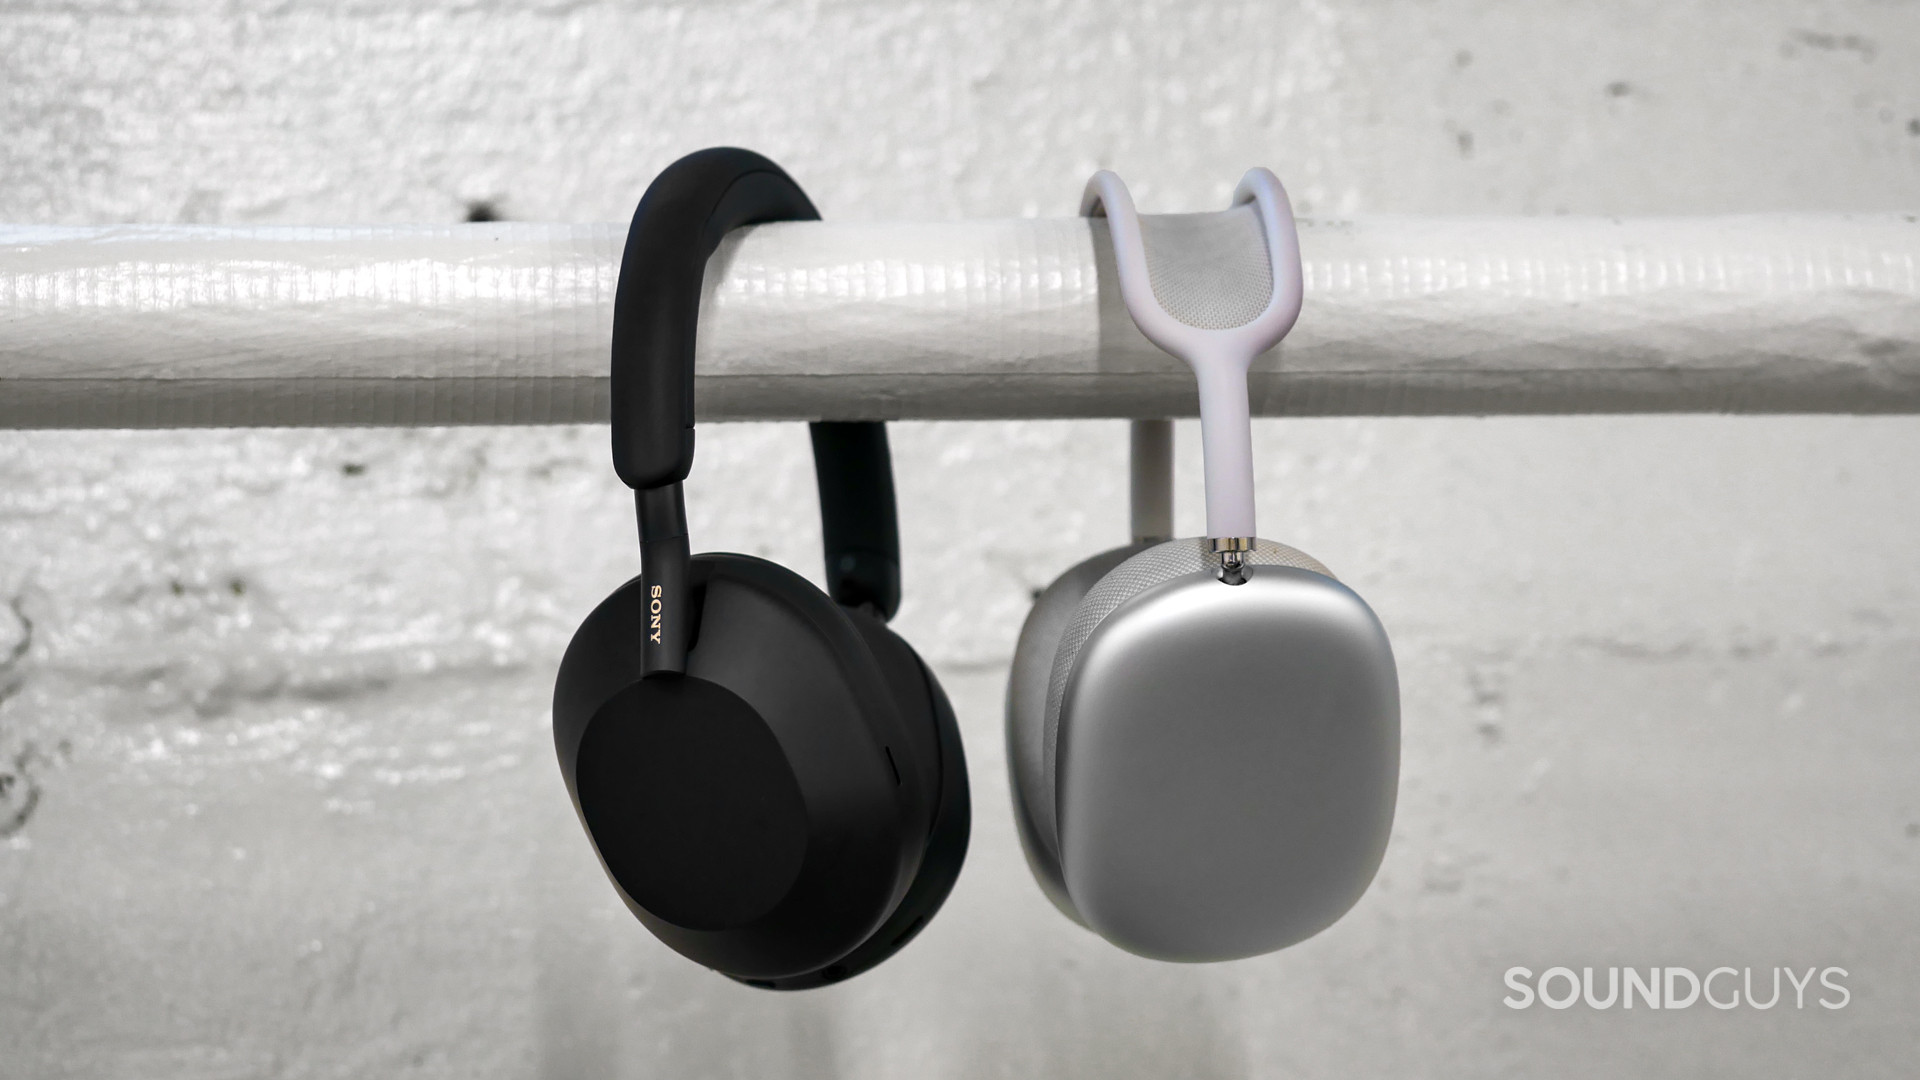 I tested Sony's WH-1000XM5 against AirPods Max, and Apple's still the king…  mostly